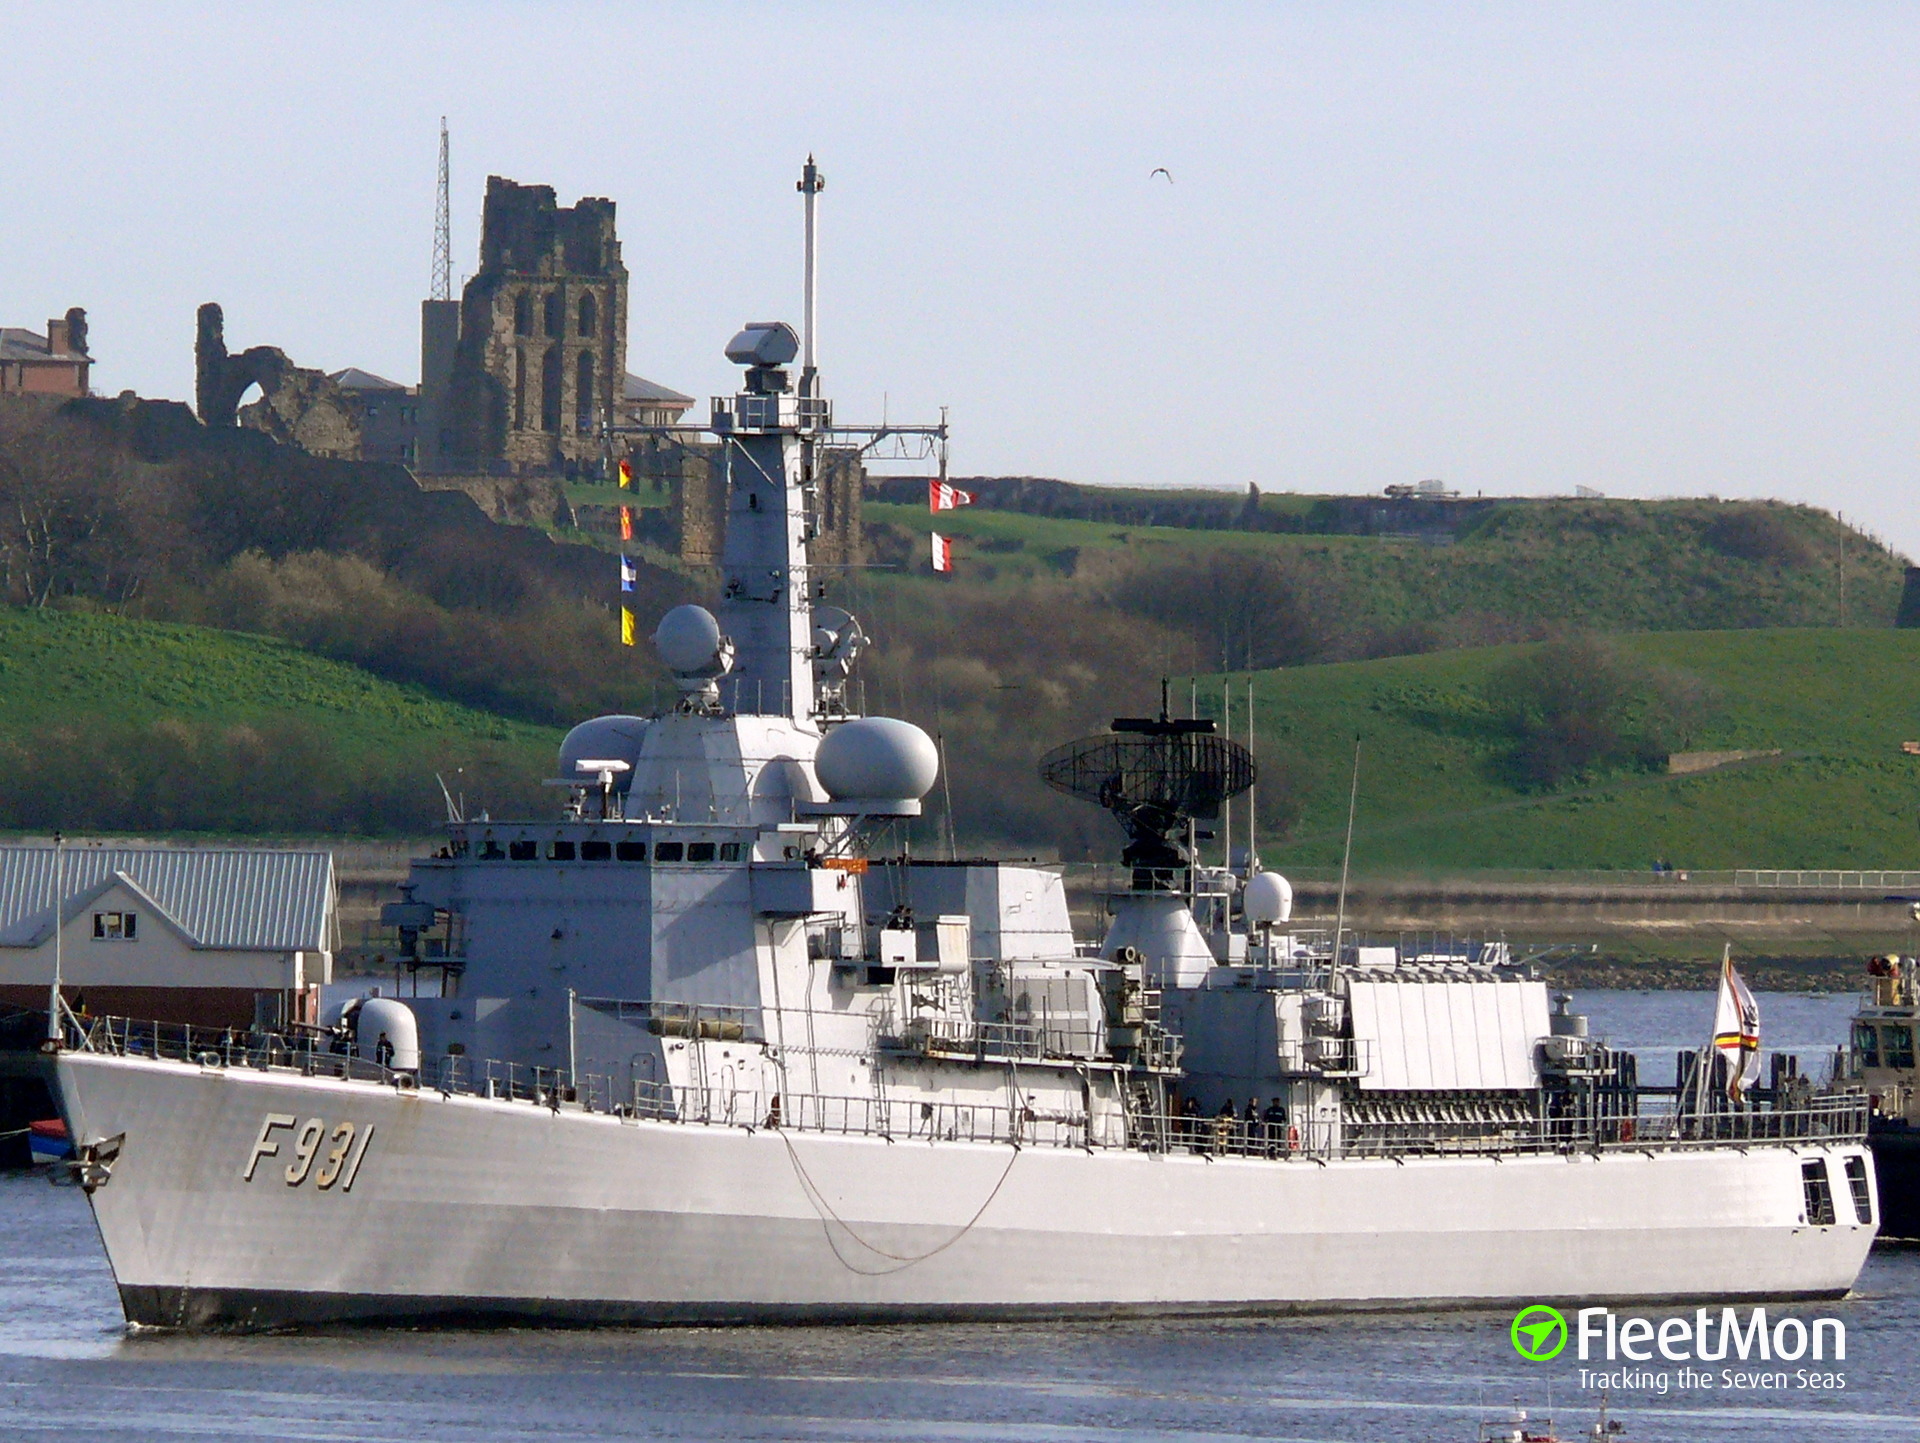 BNS LOUISE-MARIE F931